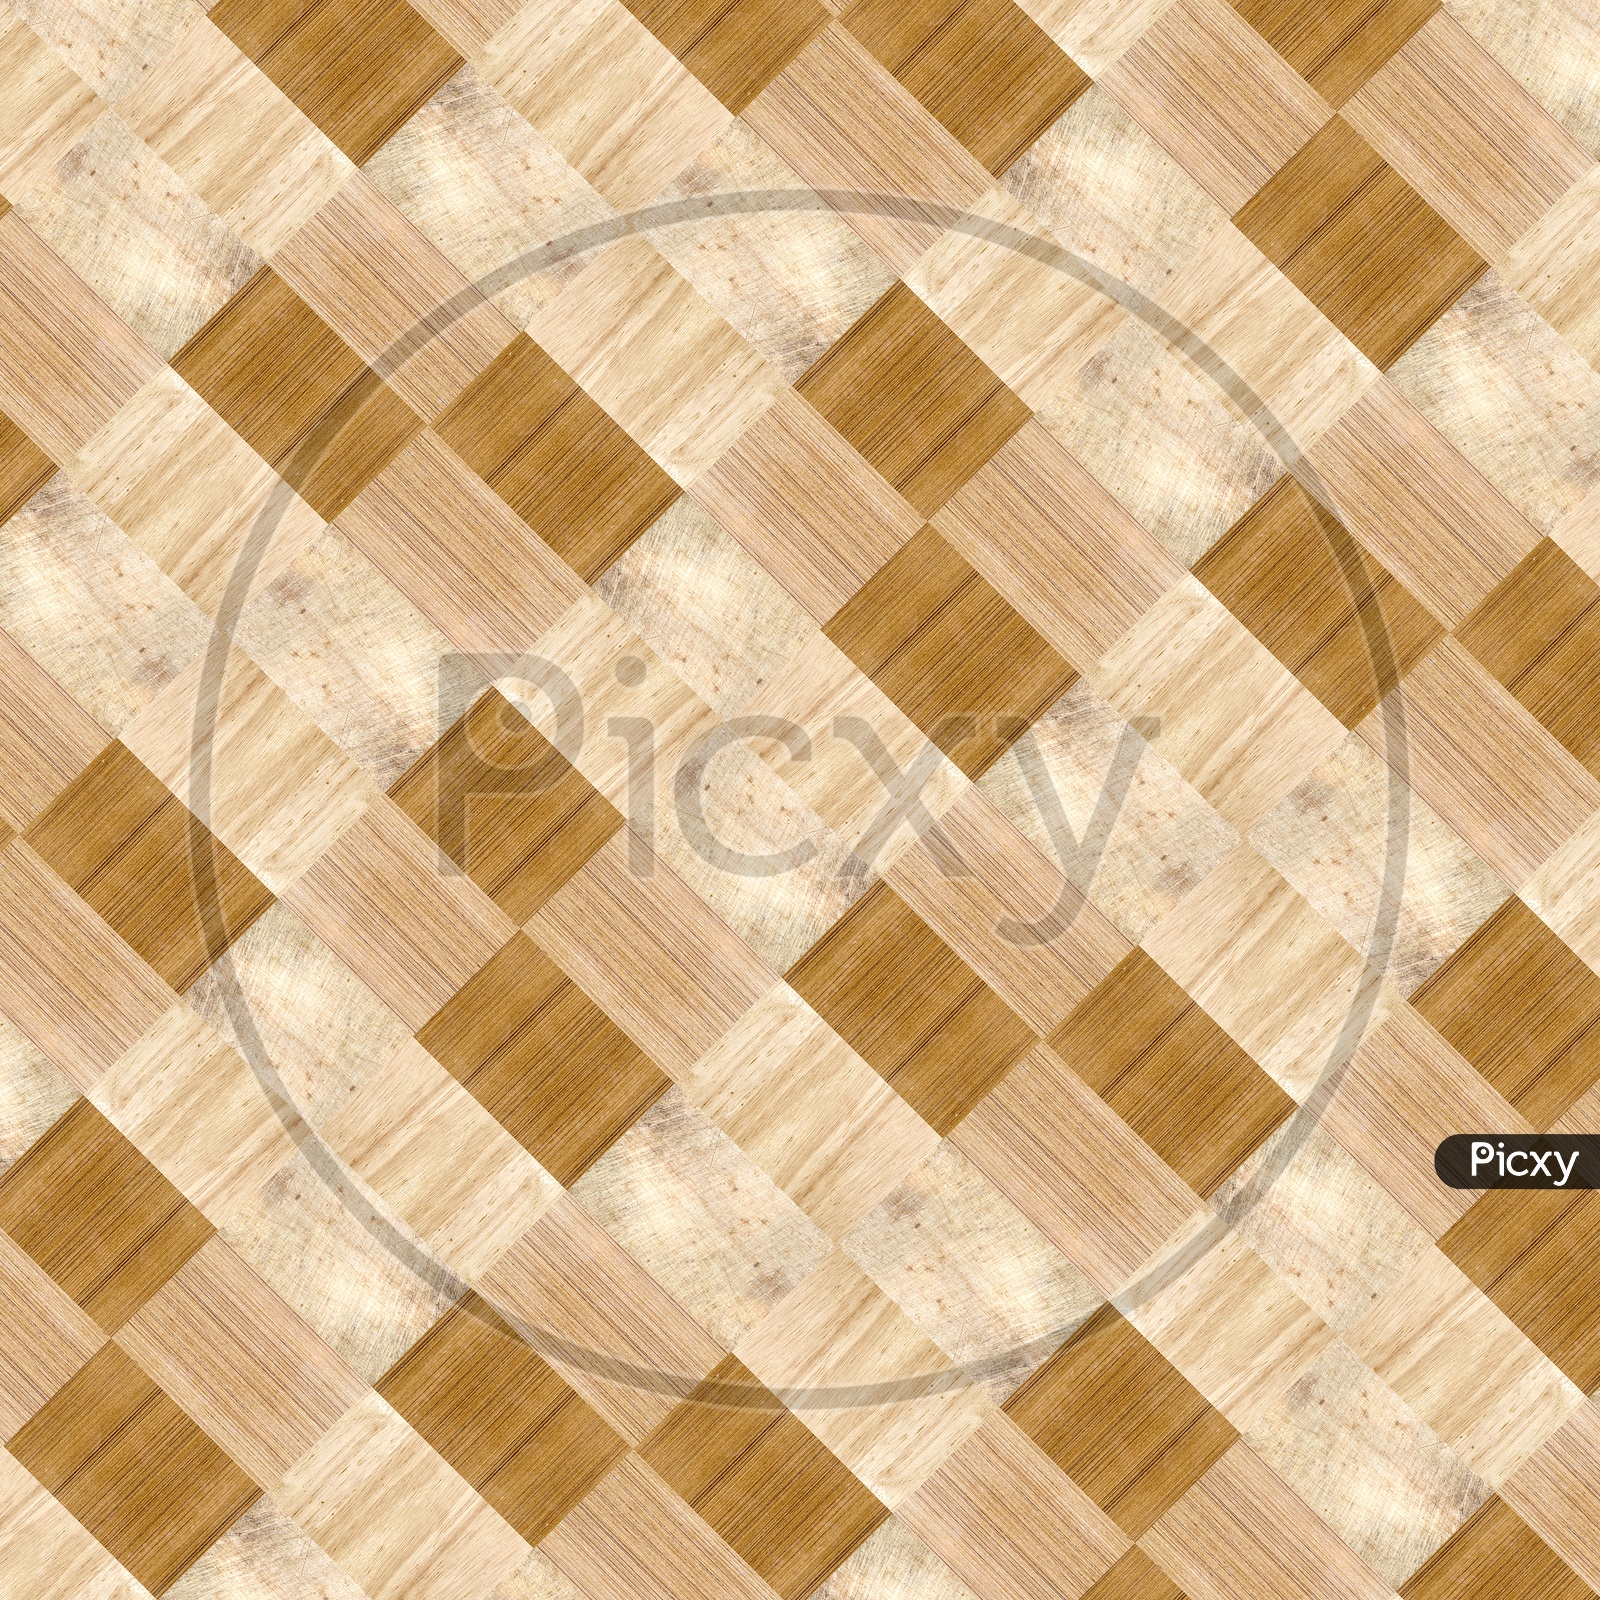 Patterns Of a Wooden Background Forming an Abstract